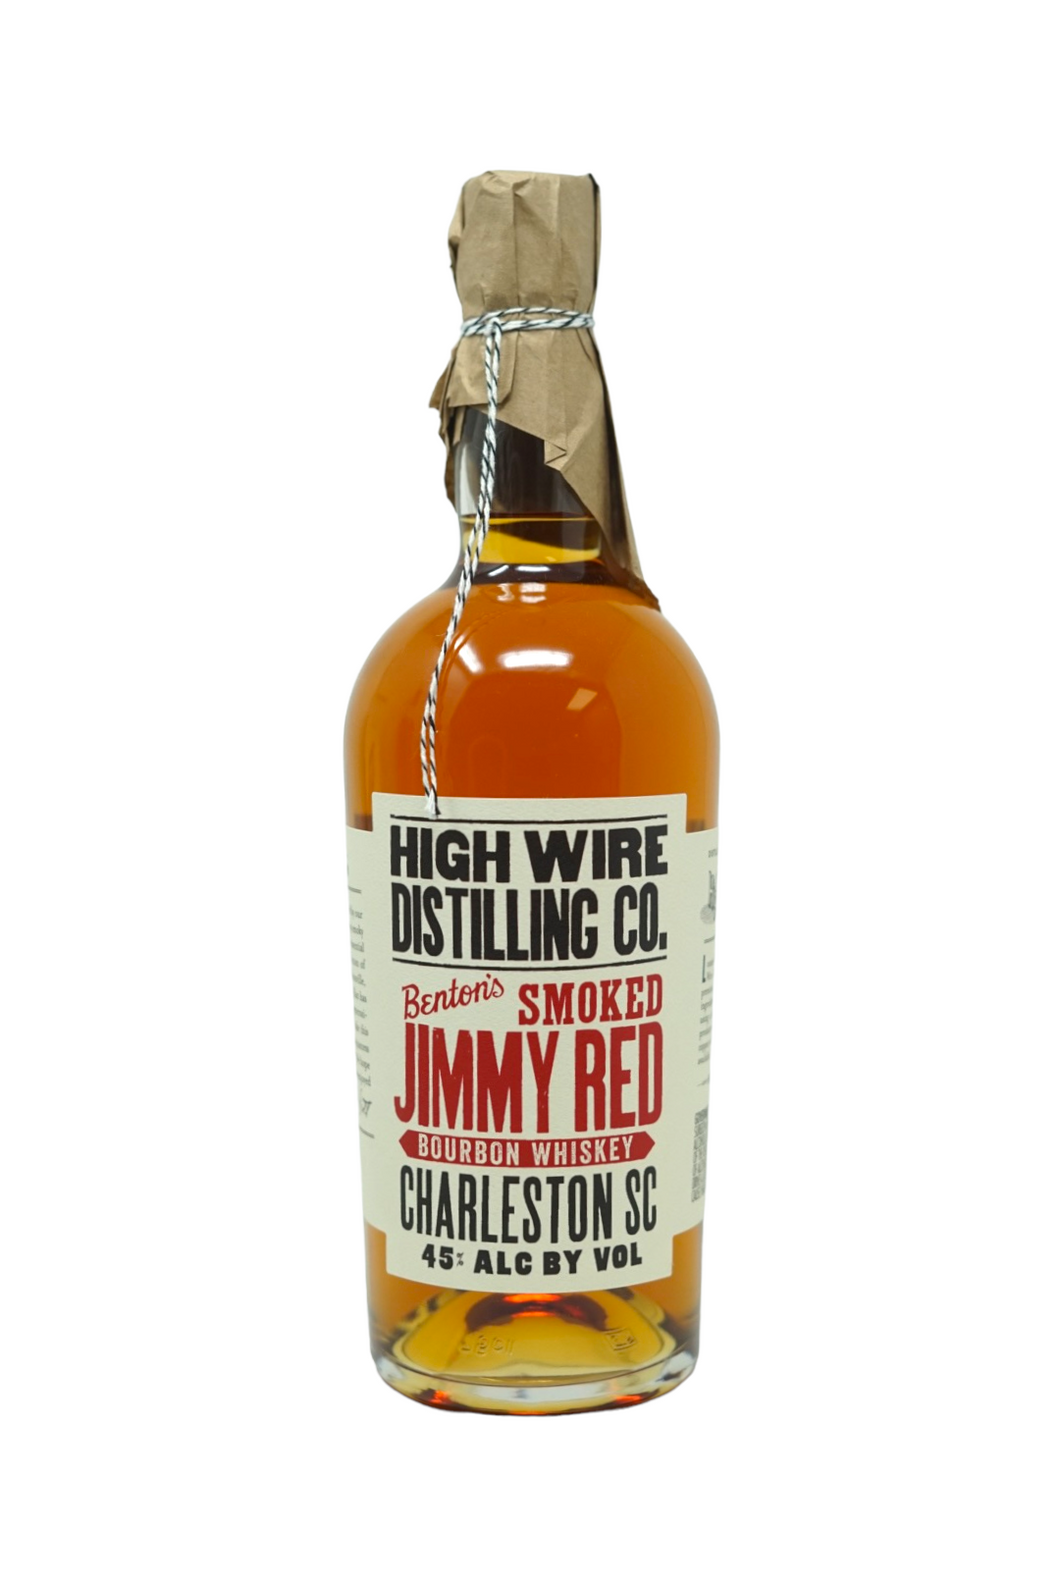 High Wire Benton's Smoked and Aged Jimmy Red Bourbon Whiskey